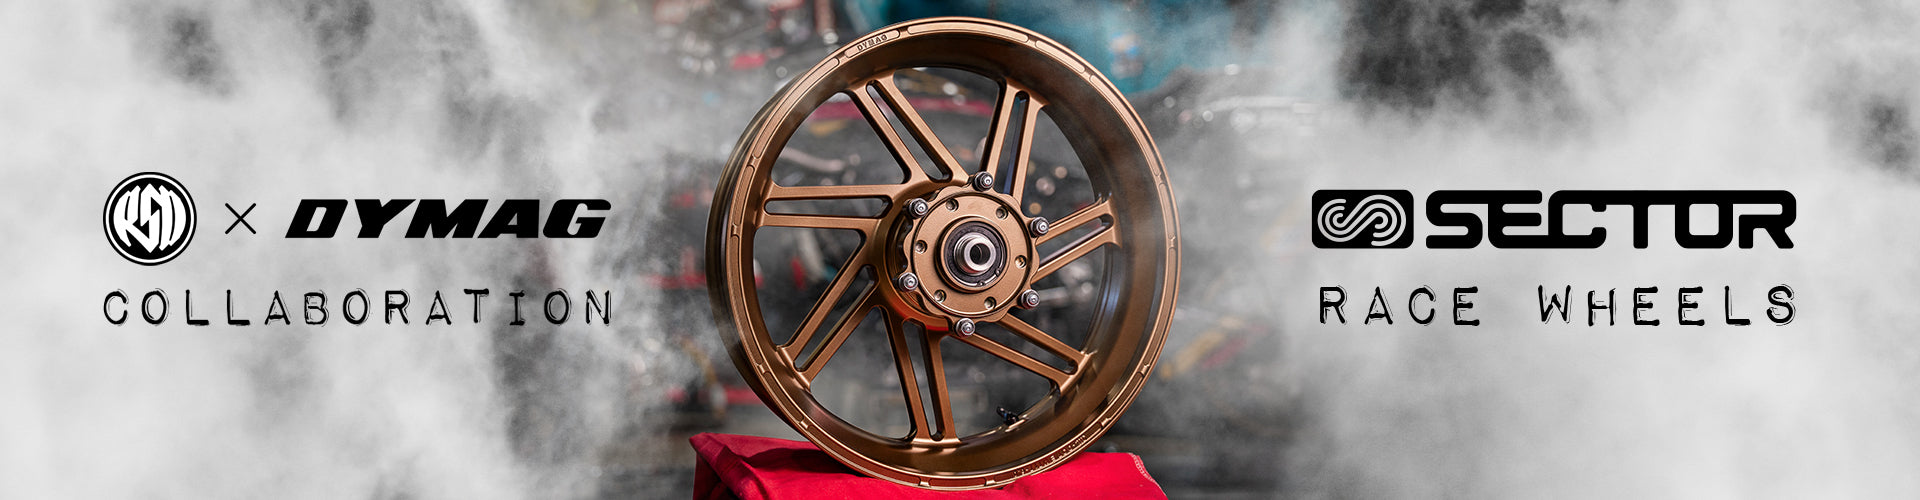 ALT Text: "Promotional banner featuring a collaboration between Dymag and Sector Race Wheels. The image showcases a high-performance racing wheel in bronze, centered on a smoky background with the logos of 'Dymag' and 'Sector Race Wheels' on either side, highlighting the partnership.